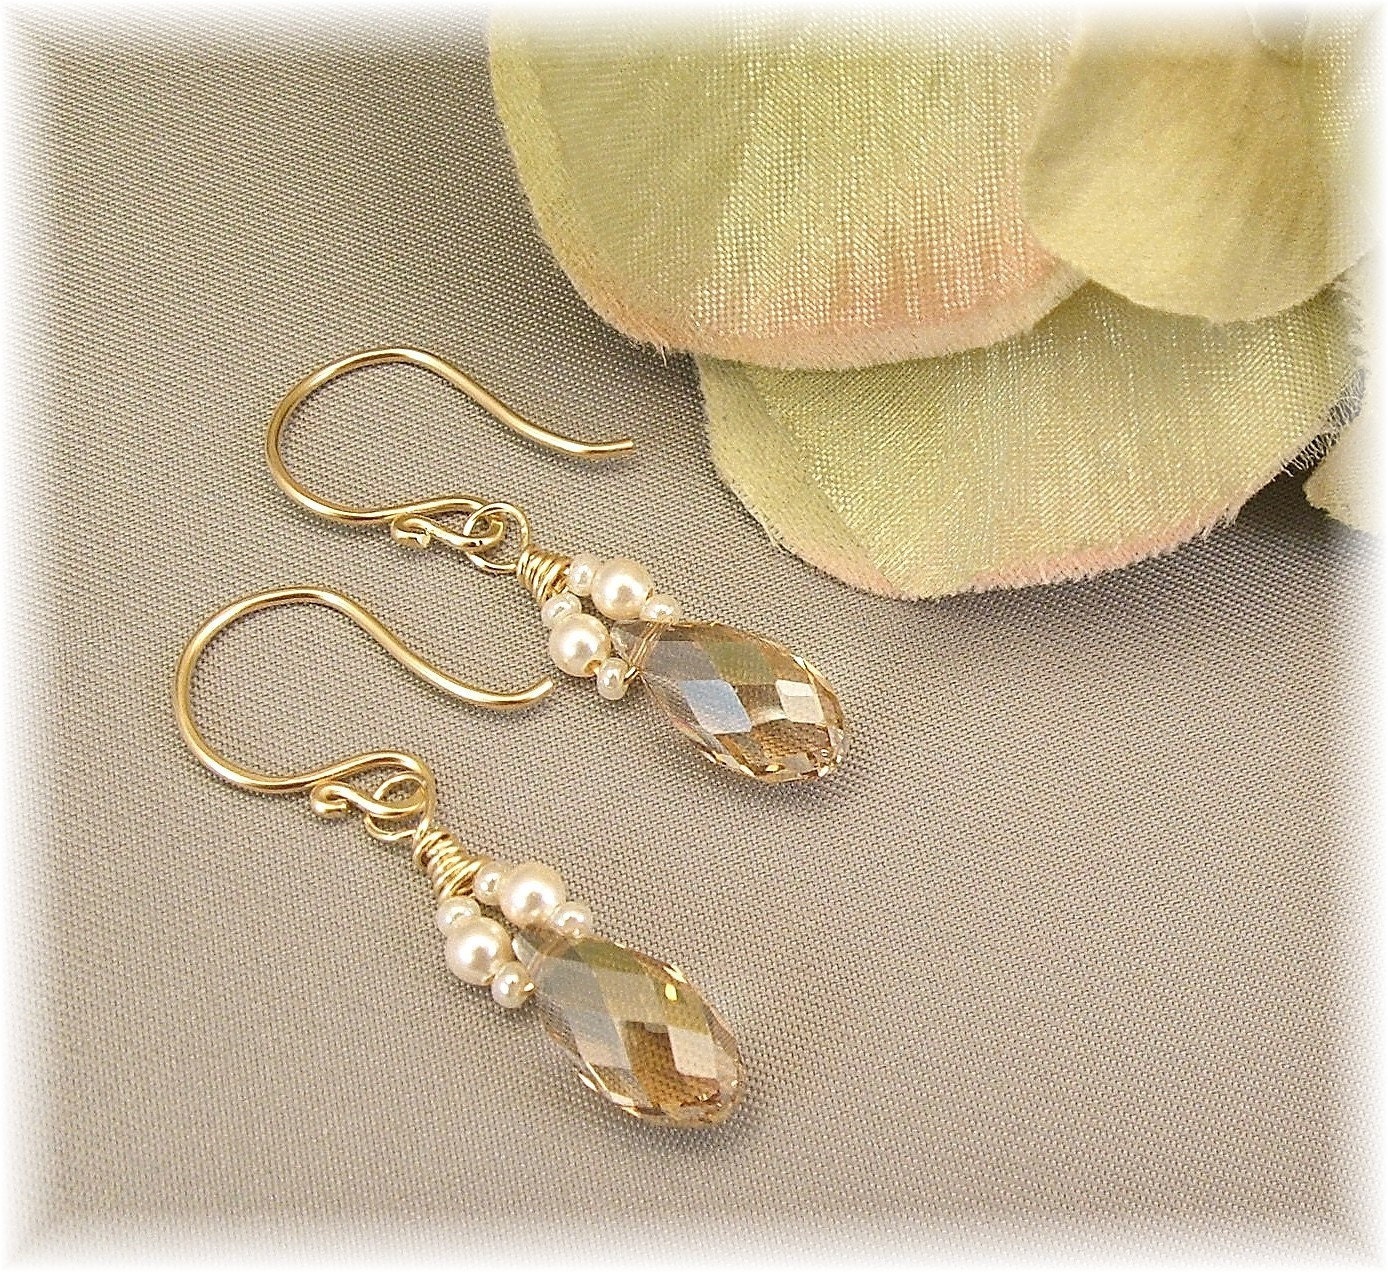 PETITE IVORY WEDDING GOWN EARRINGS IVORY PEARL by wwwhandwiredetsycom